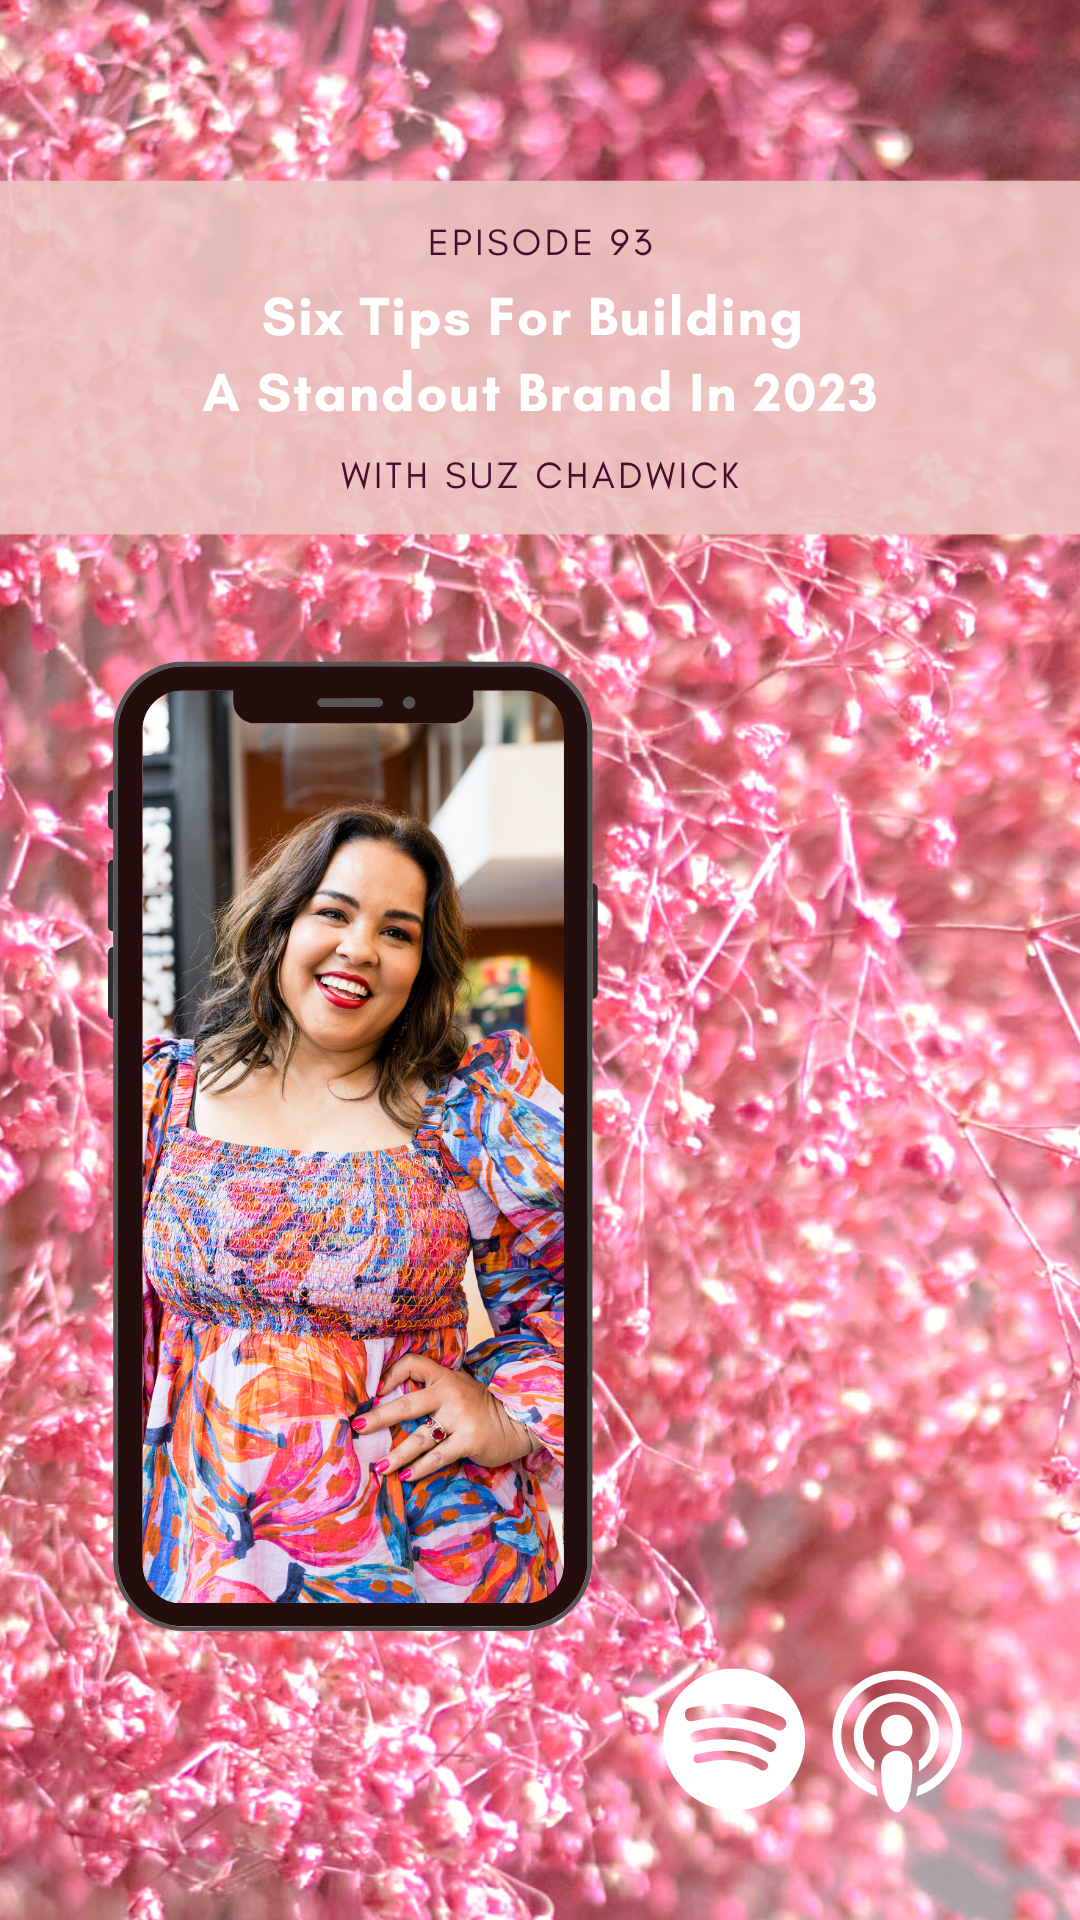 Six Tips For Building A Standout Brand In 2023 with Suz Chadwick